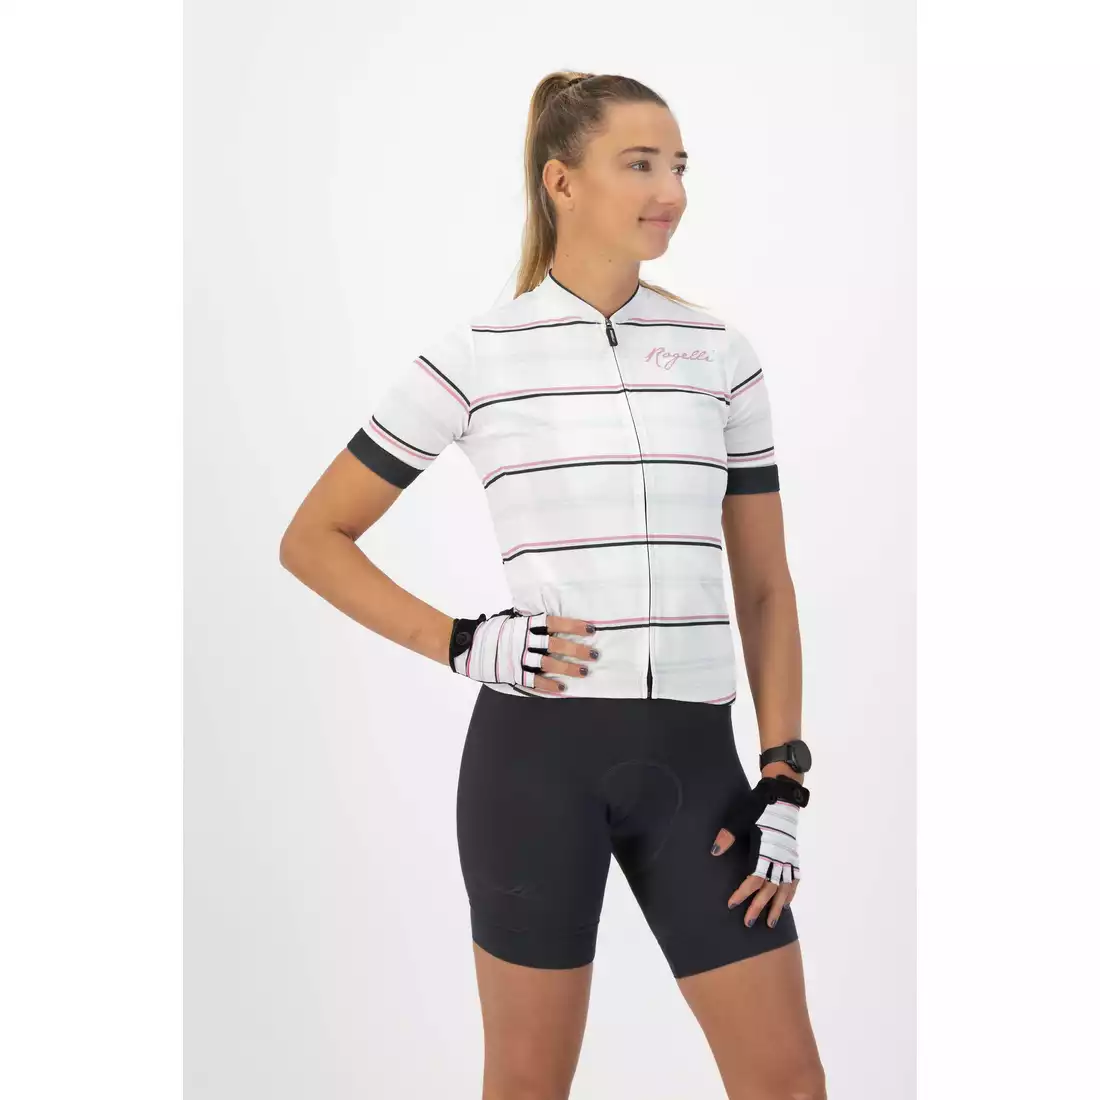 ROGELLI STRIPE Women's cycling jersey, white and pink